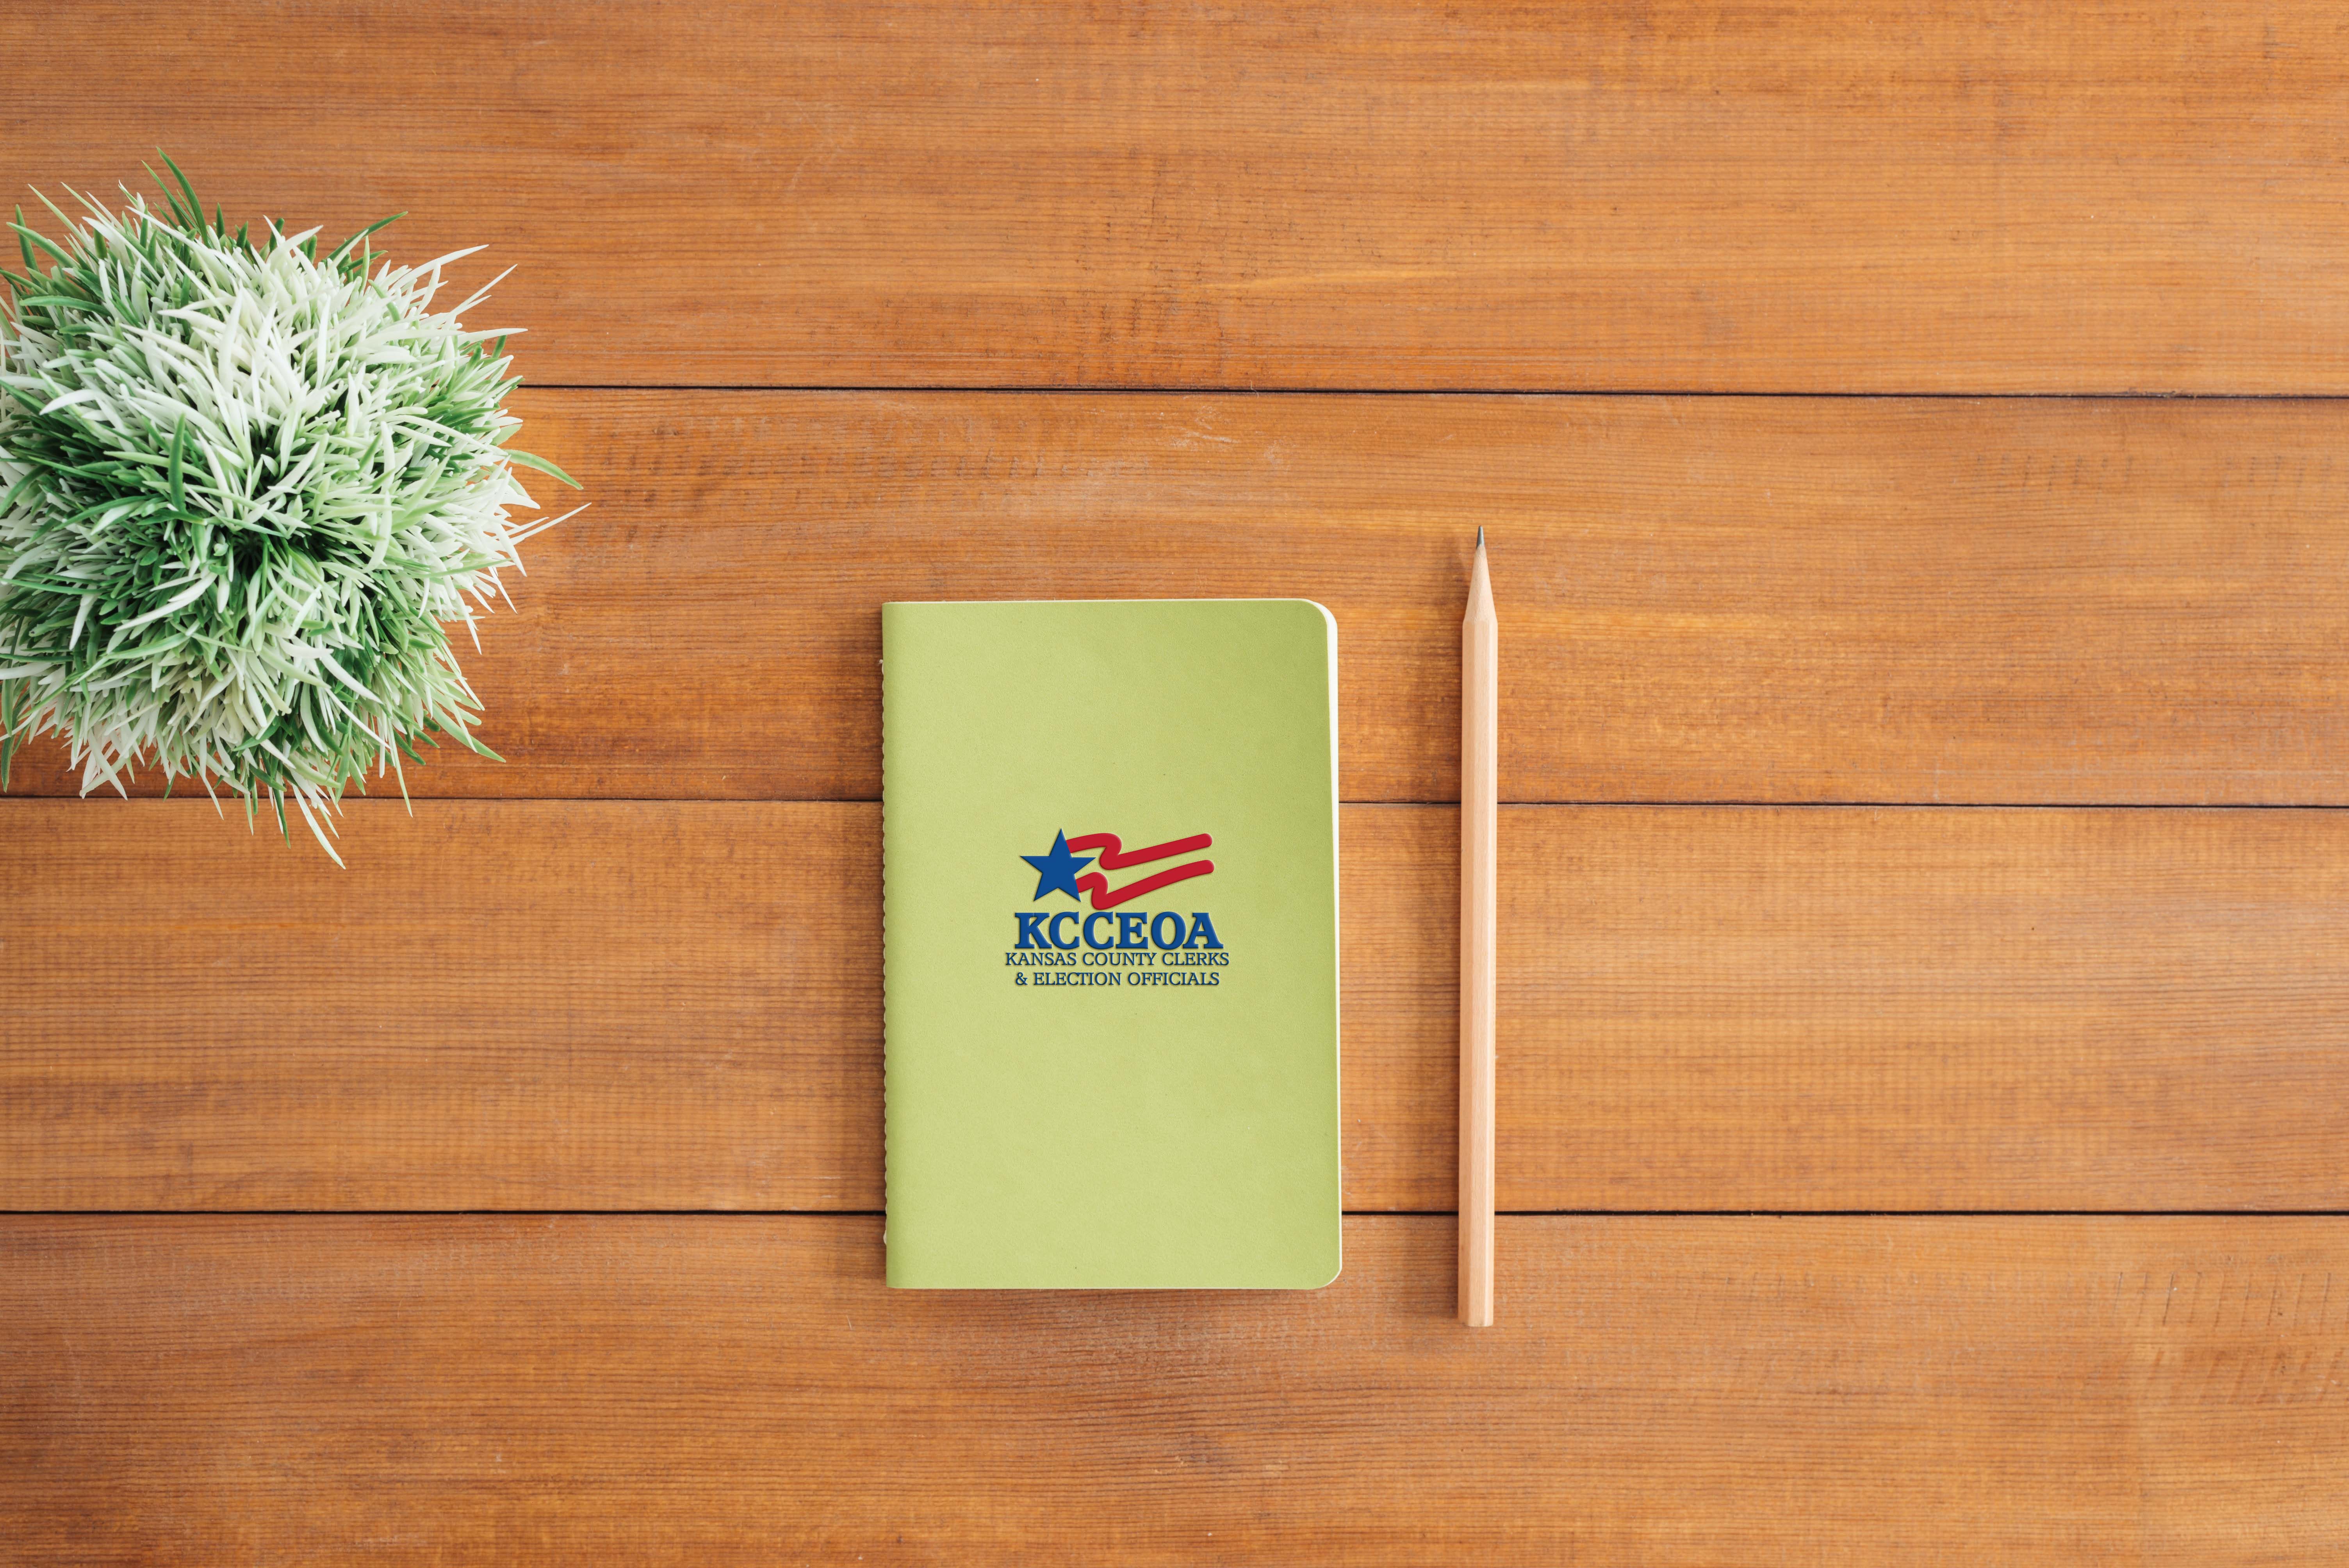 kcceoa logo embossed on notebook